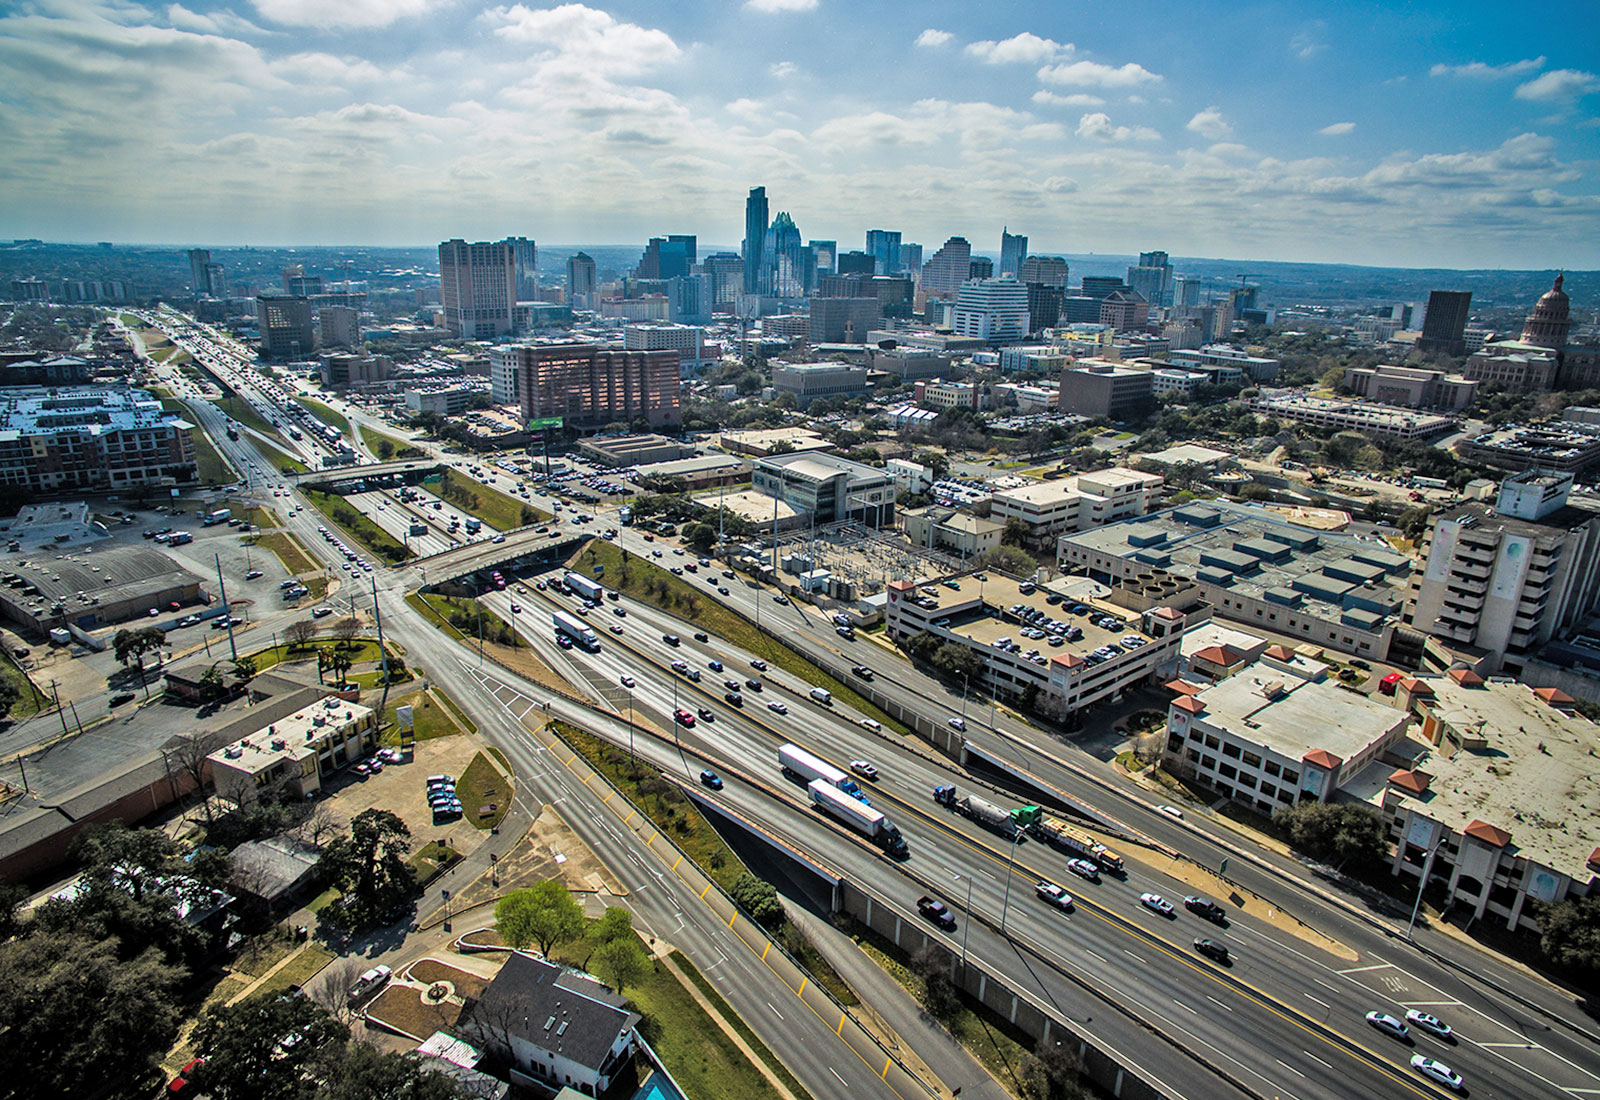 a major multiway highway with cars cuts across an urban area in front of the Austin skyline